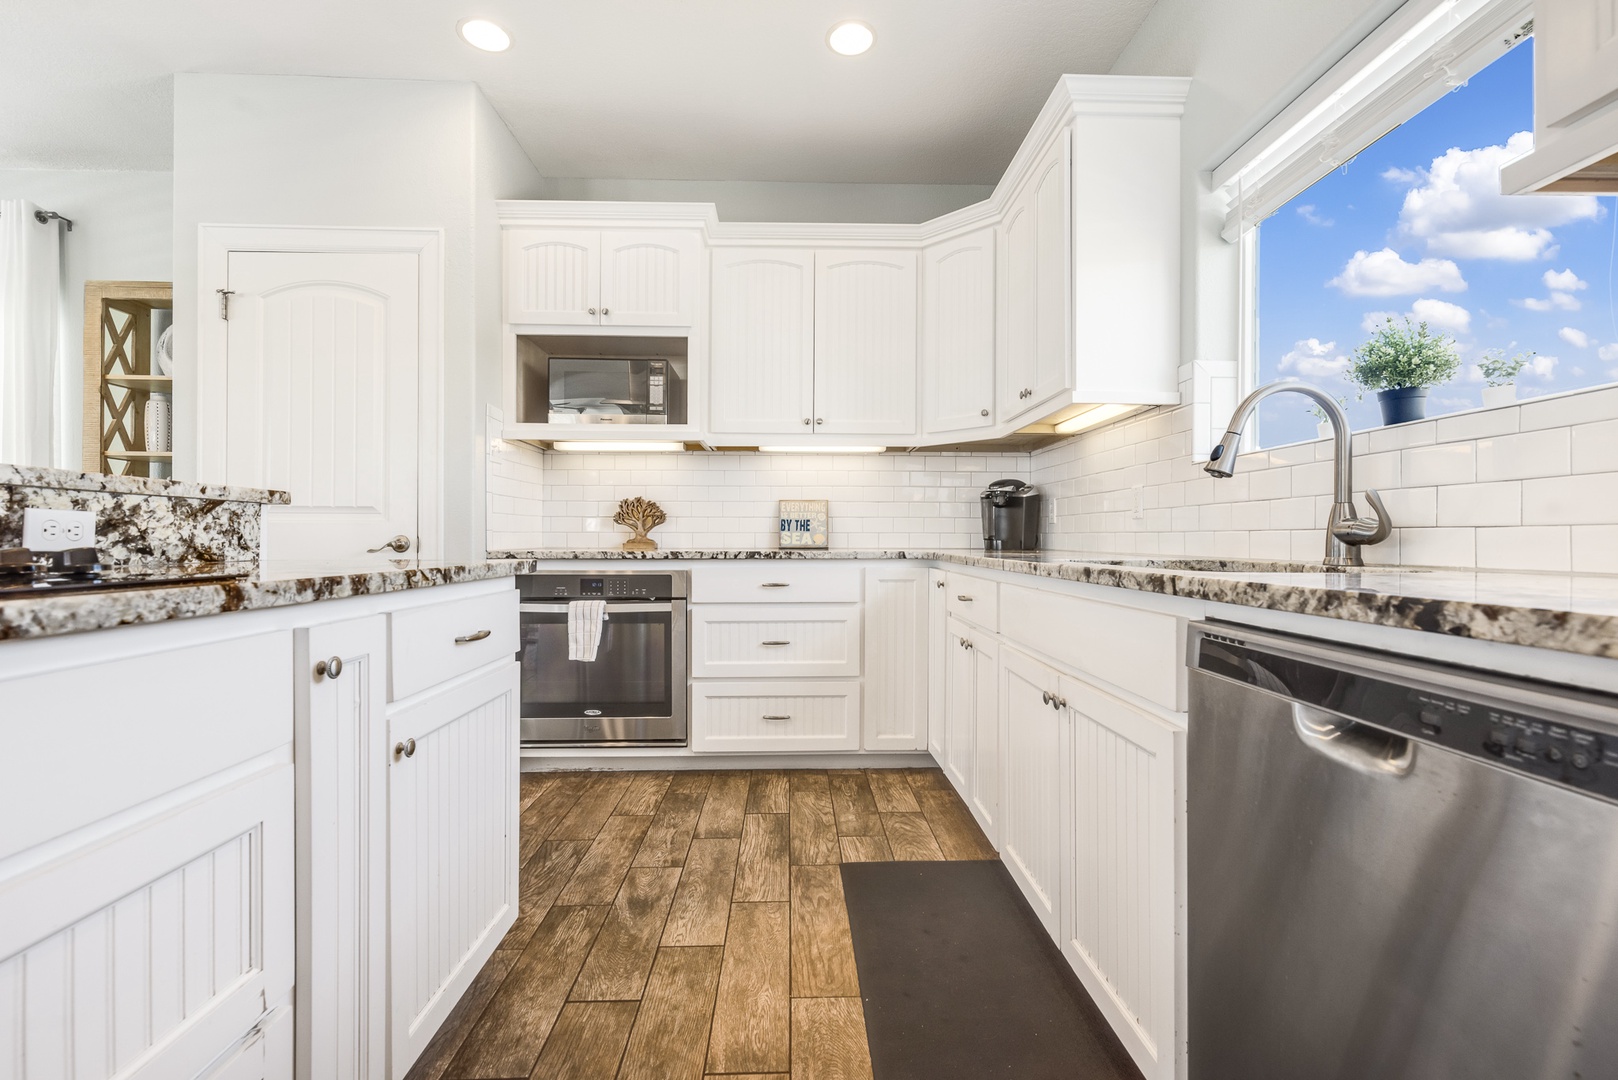 The breezy 3rd Floor Kitchen offers fantastic amenities and tons of counter space & storage